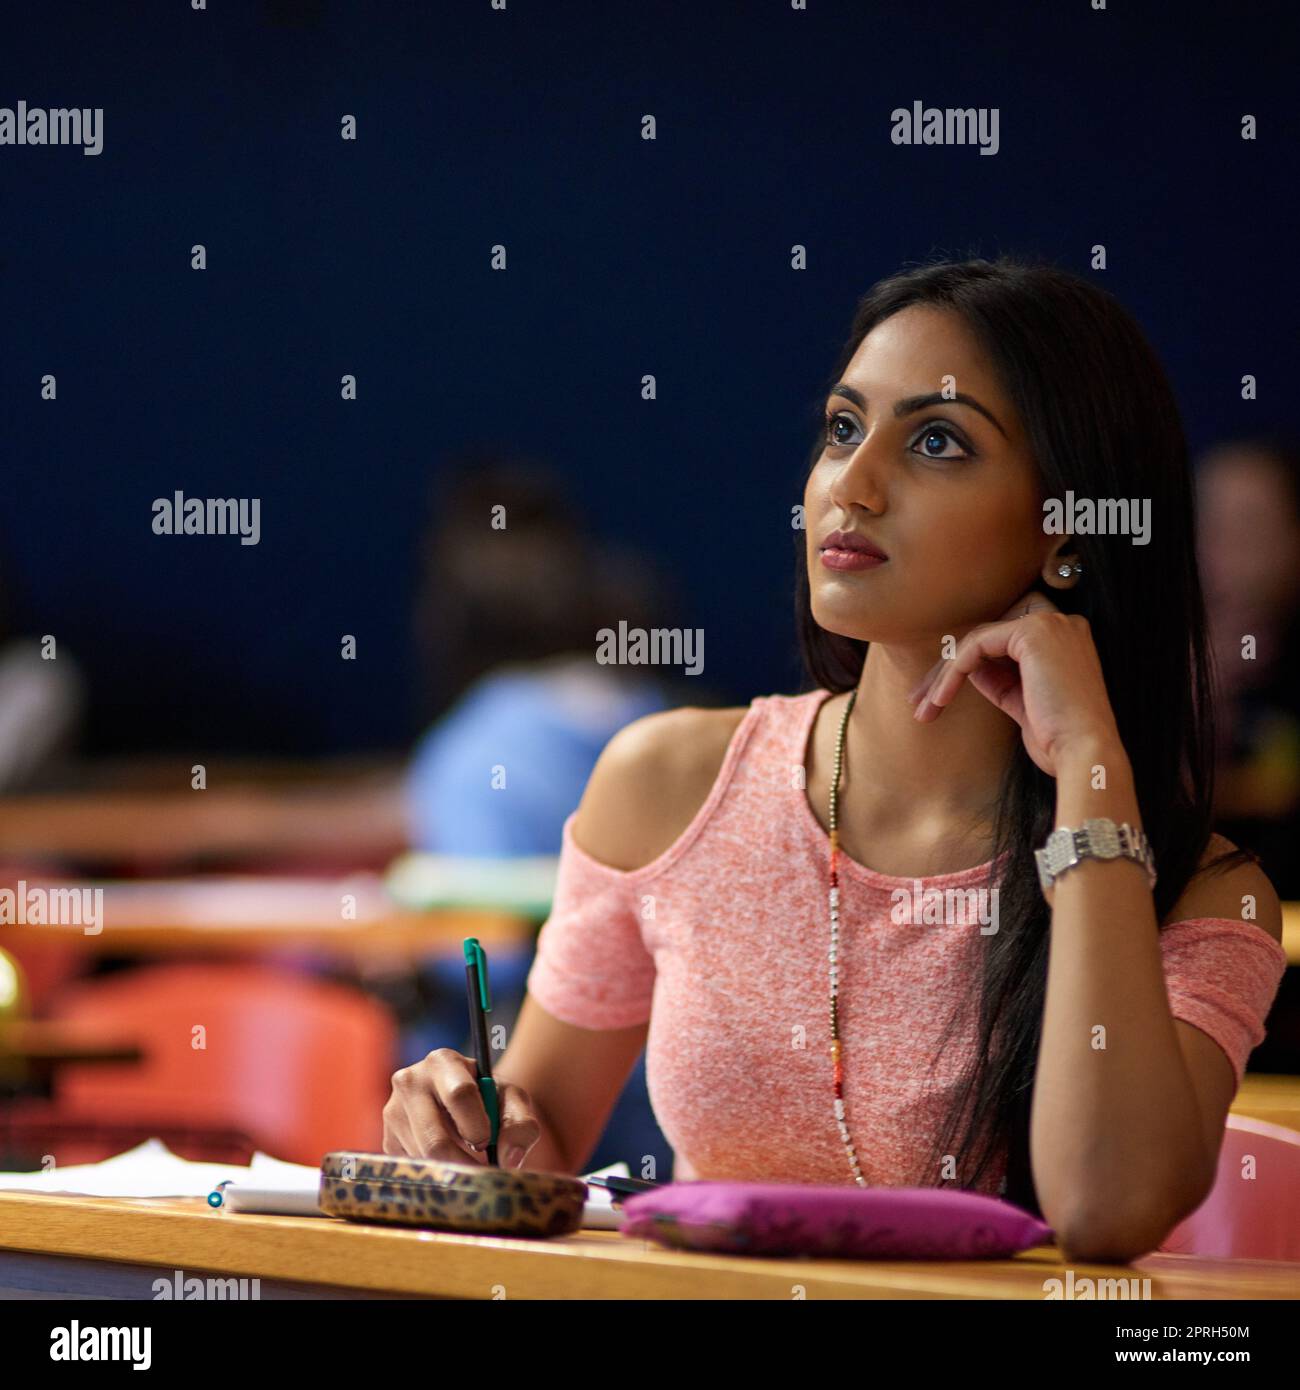 She takes her education seriously. a beautiful university student making notes while sitting in a lecture hall. Stock Photo